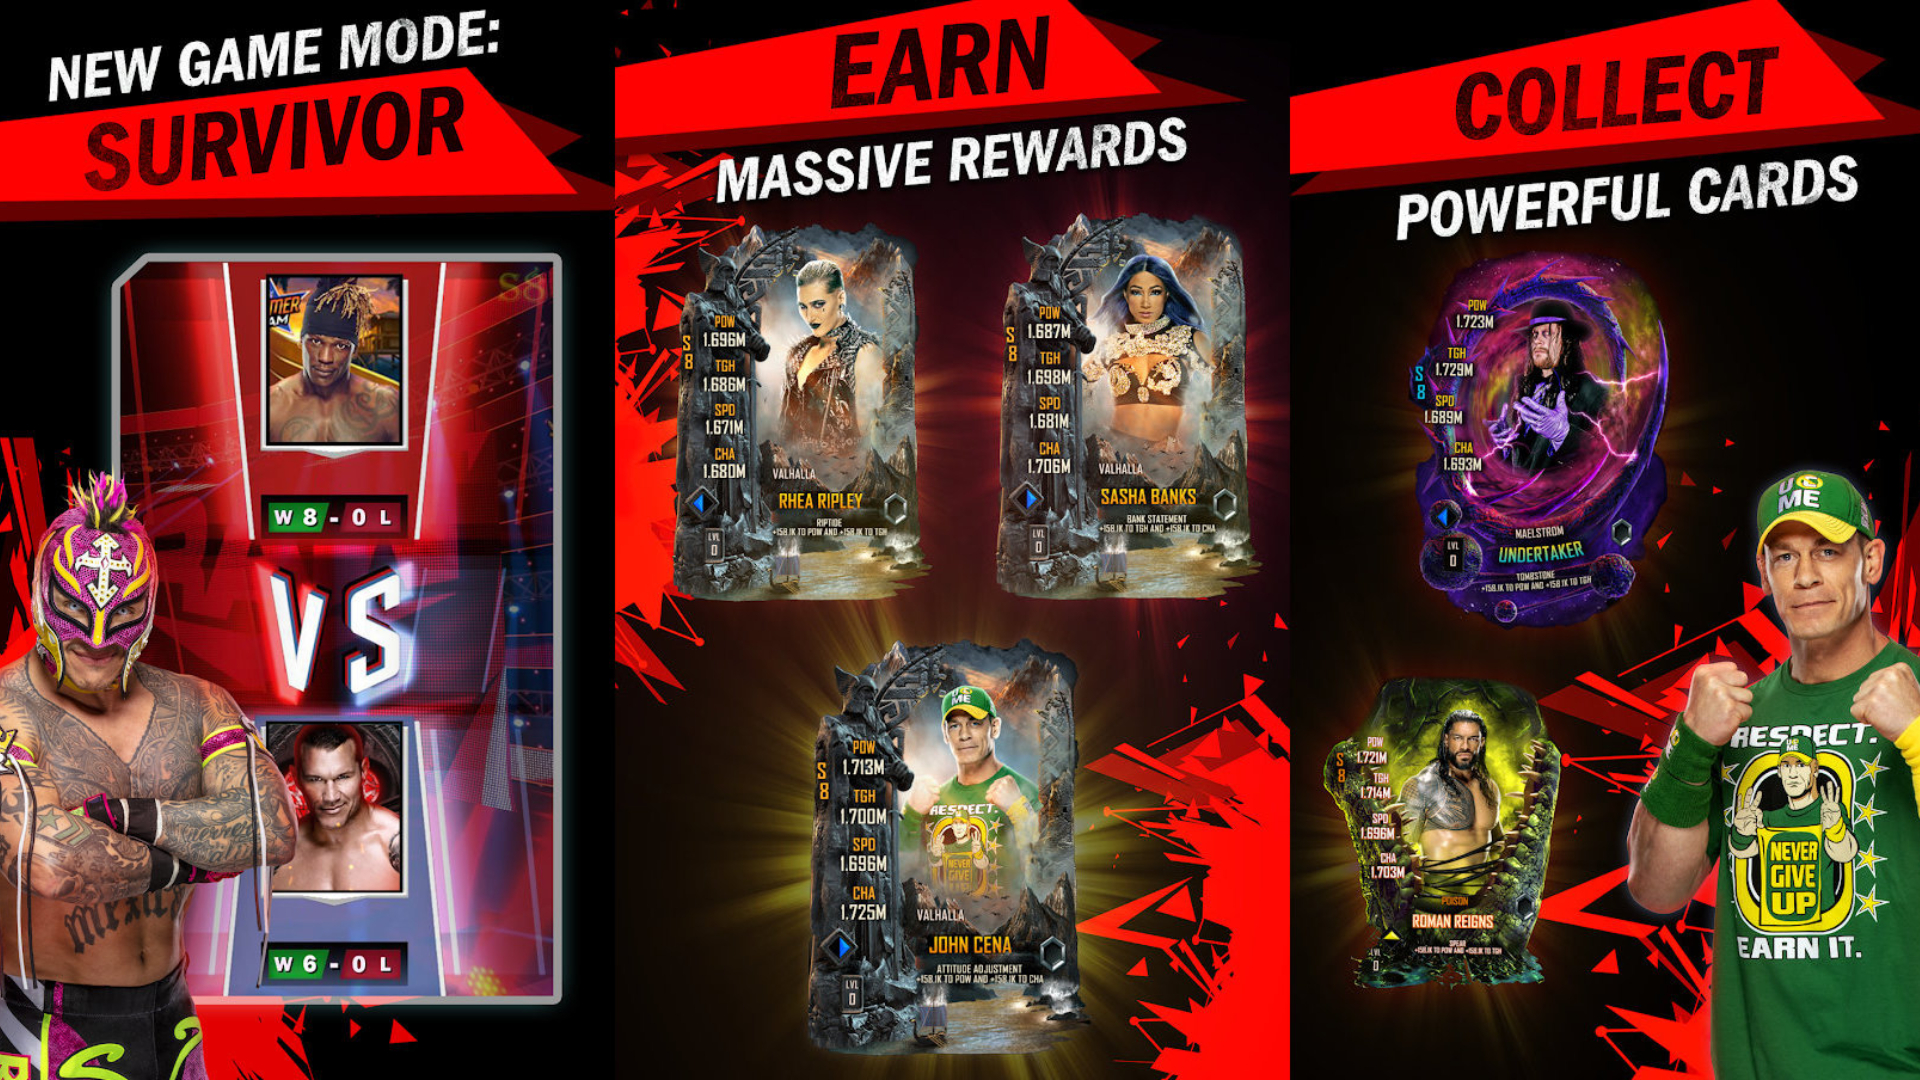 Best mobile sports games: WWE SuperCard - Battle Cards. Image shows Rey Myserio and John Cena alongside screenshots. At the top of the image it says "New game mode: Survivor. Earn massive rewards. Collect powerful cards."